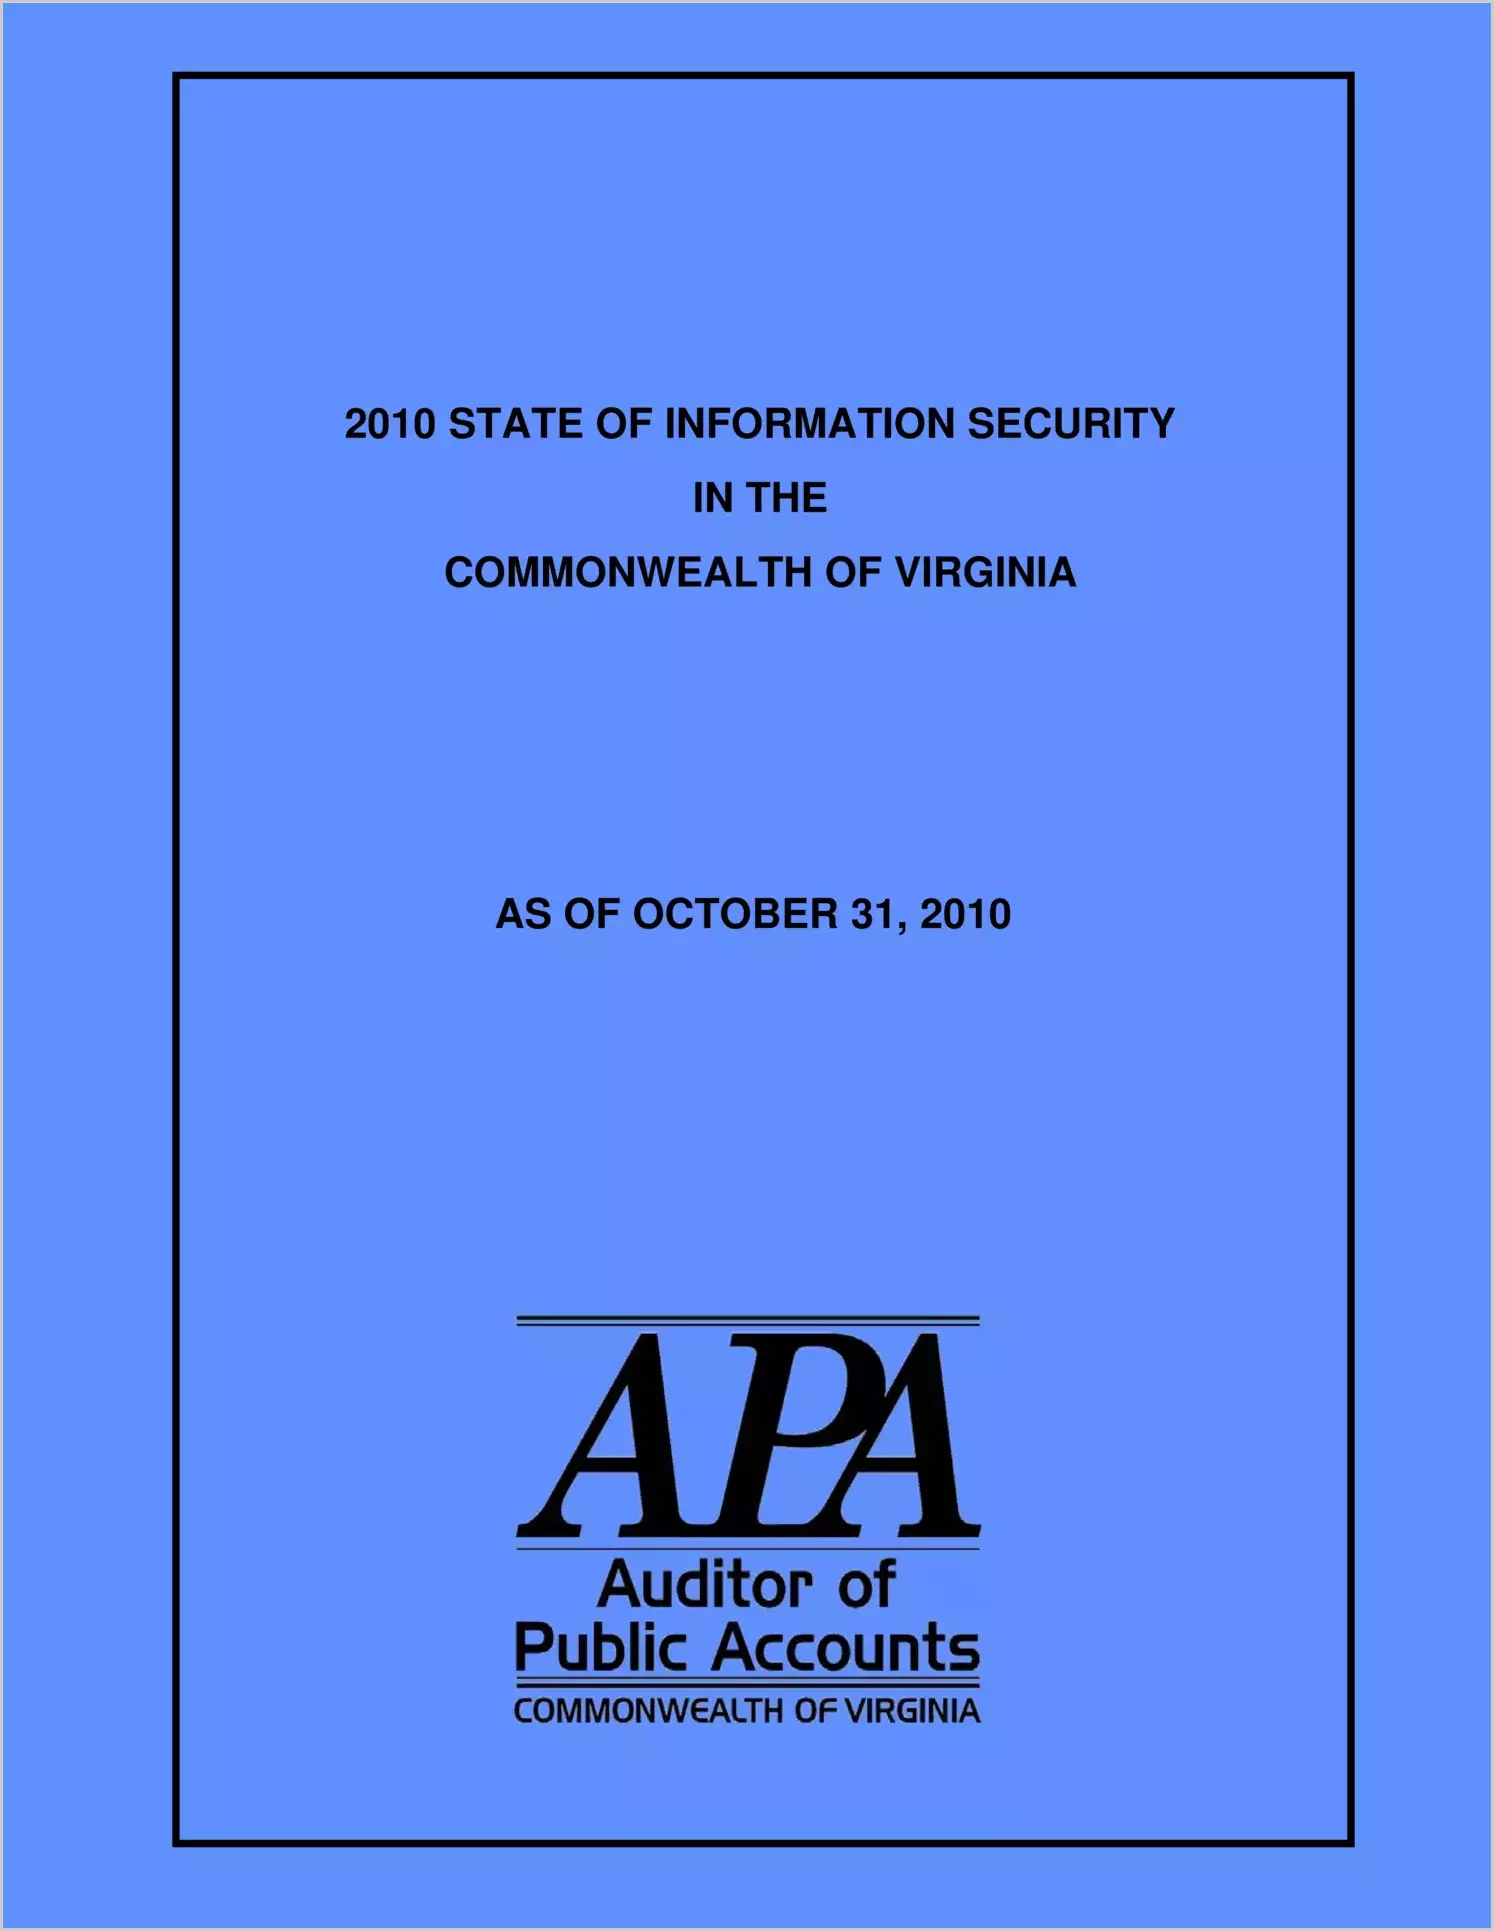 2010 State of Information Security in the Commonwealth of Virginia as of October 31, 2010